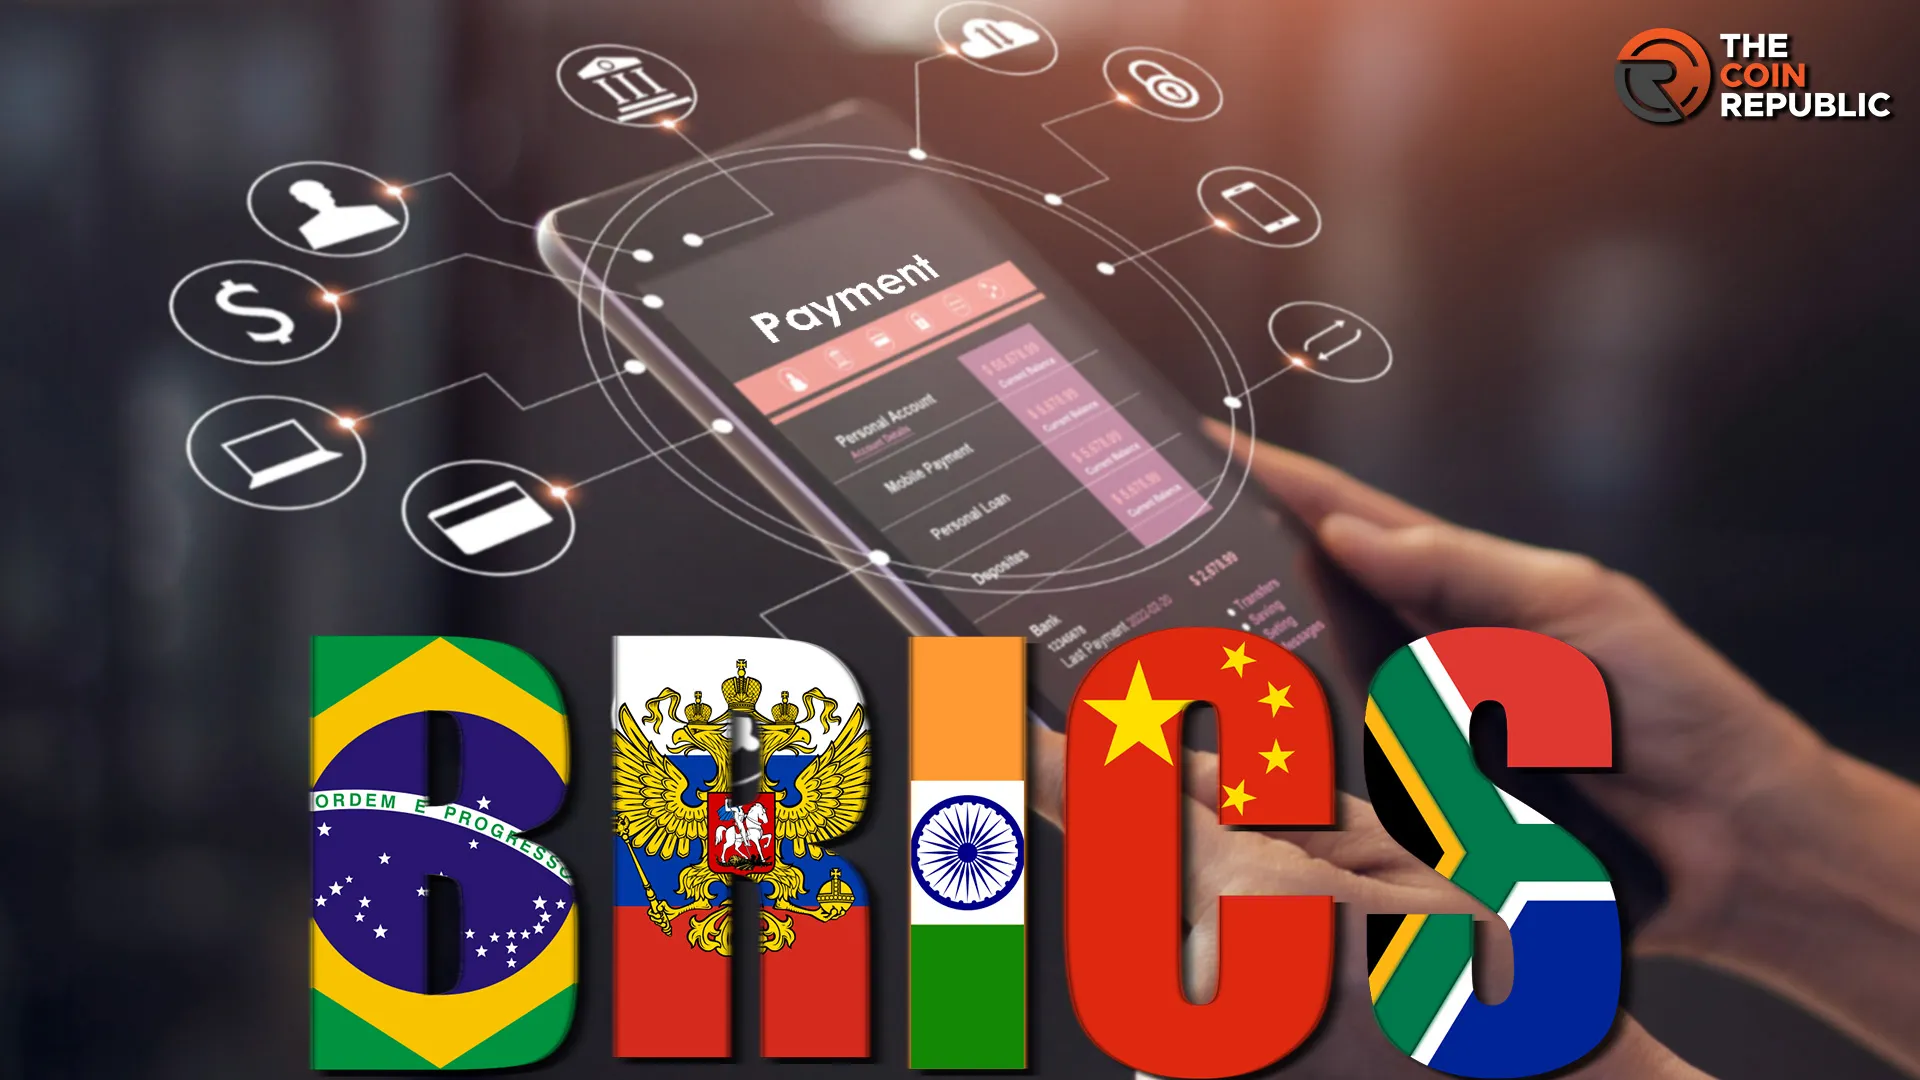 BRICS is Developing a Blockchain-Based Direct Payment System